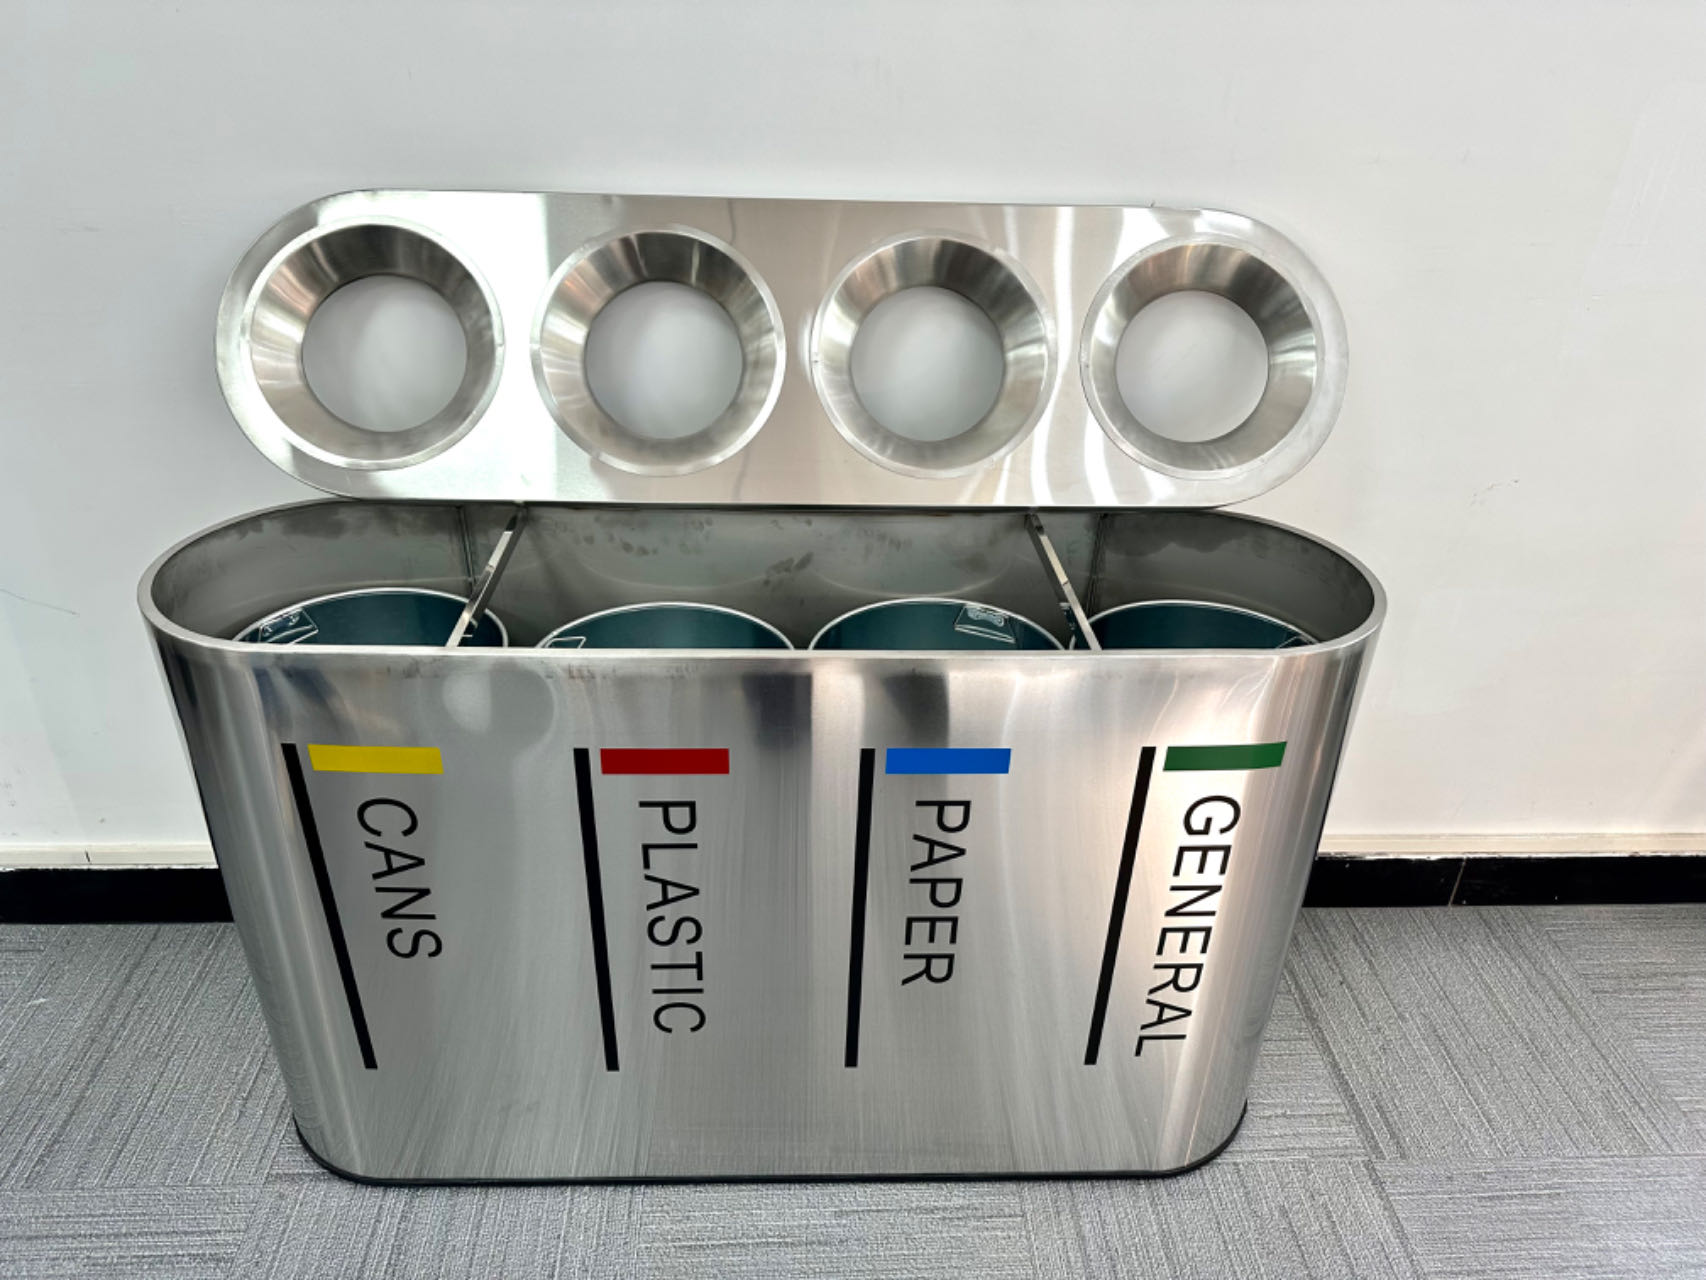 4 Compatment Stainless Steel Trash Bin for Airpot YH-509